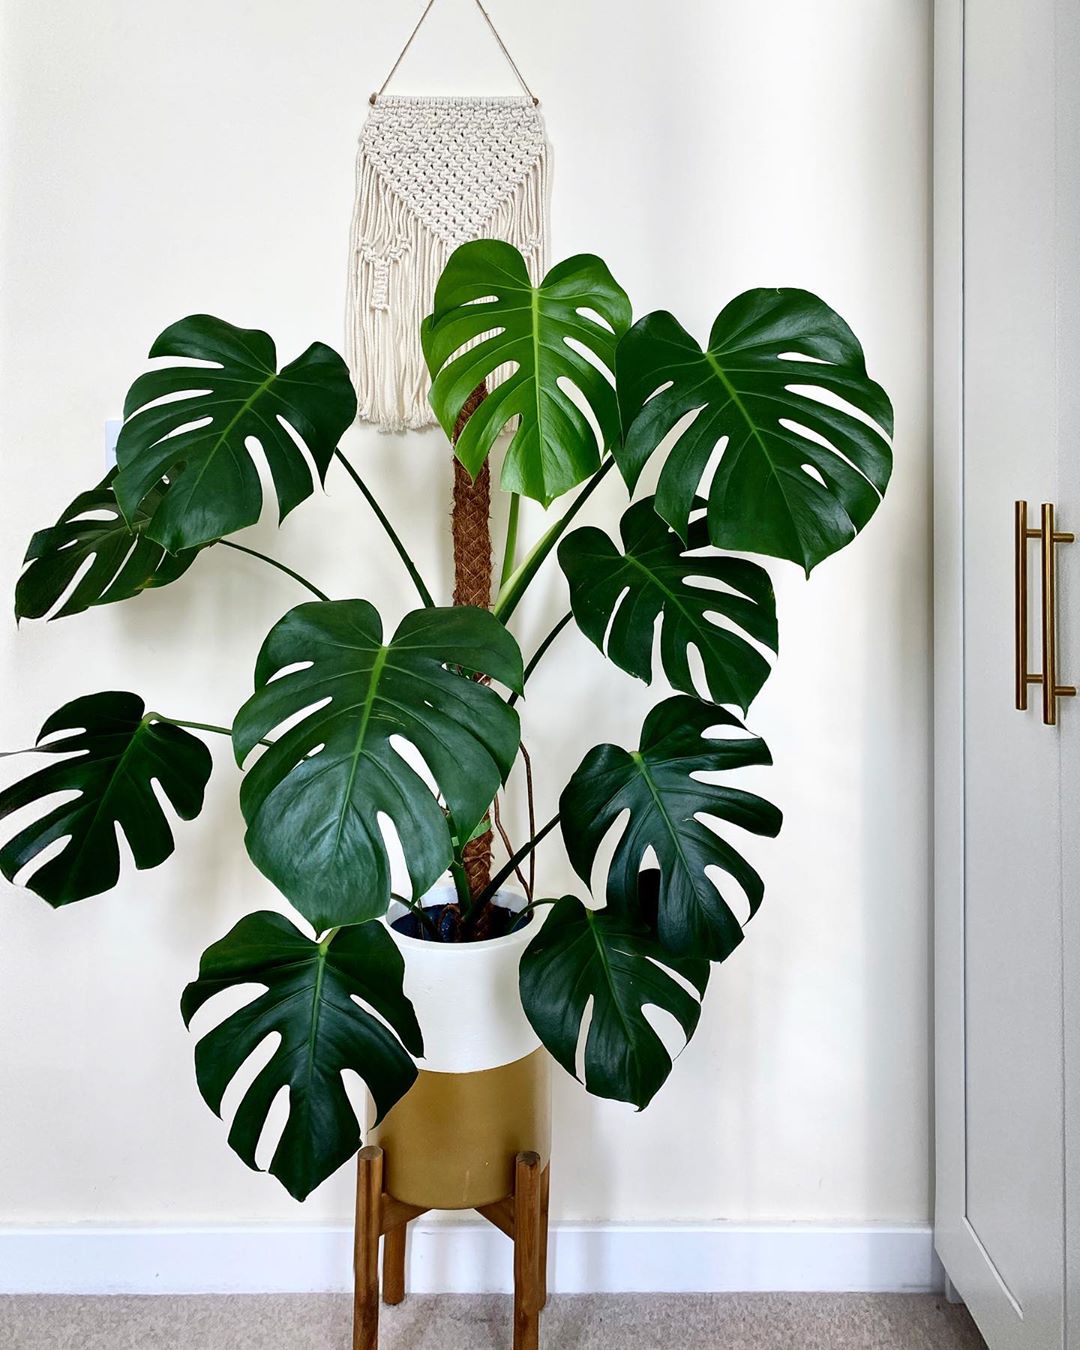 personalized monstera care: water, light, nutrients | greg app